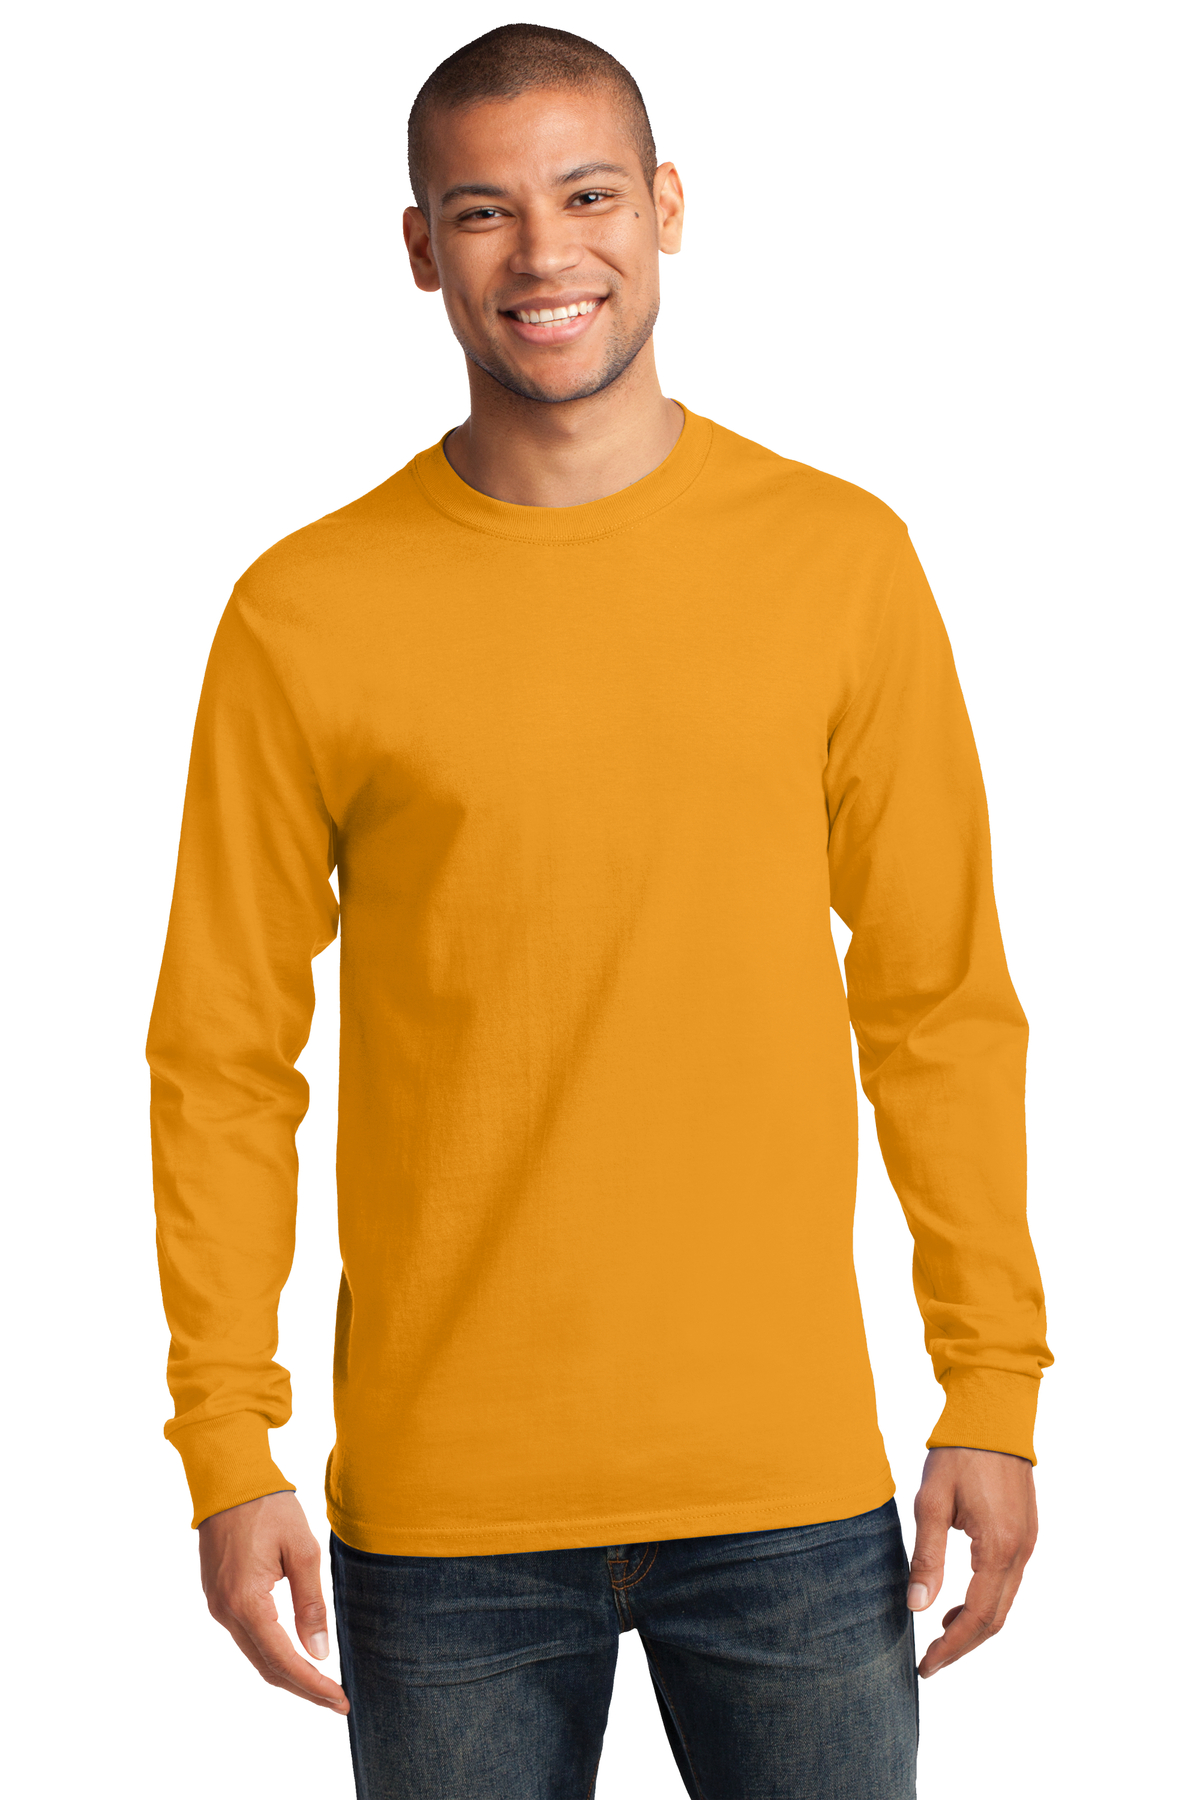 Port & Company Embroidered Men's Long Sleeve Essential Tee - Queensboro